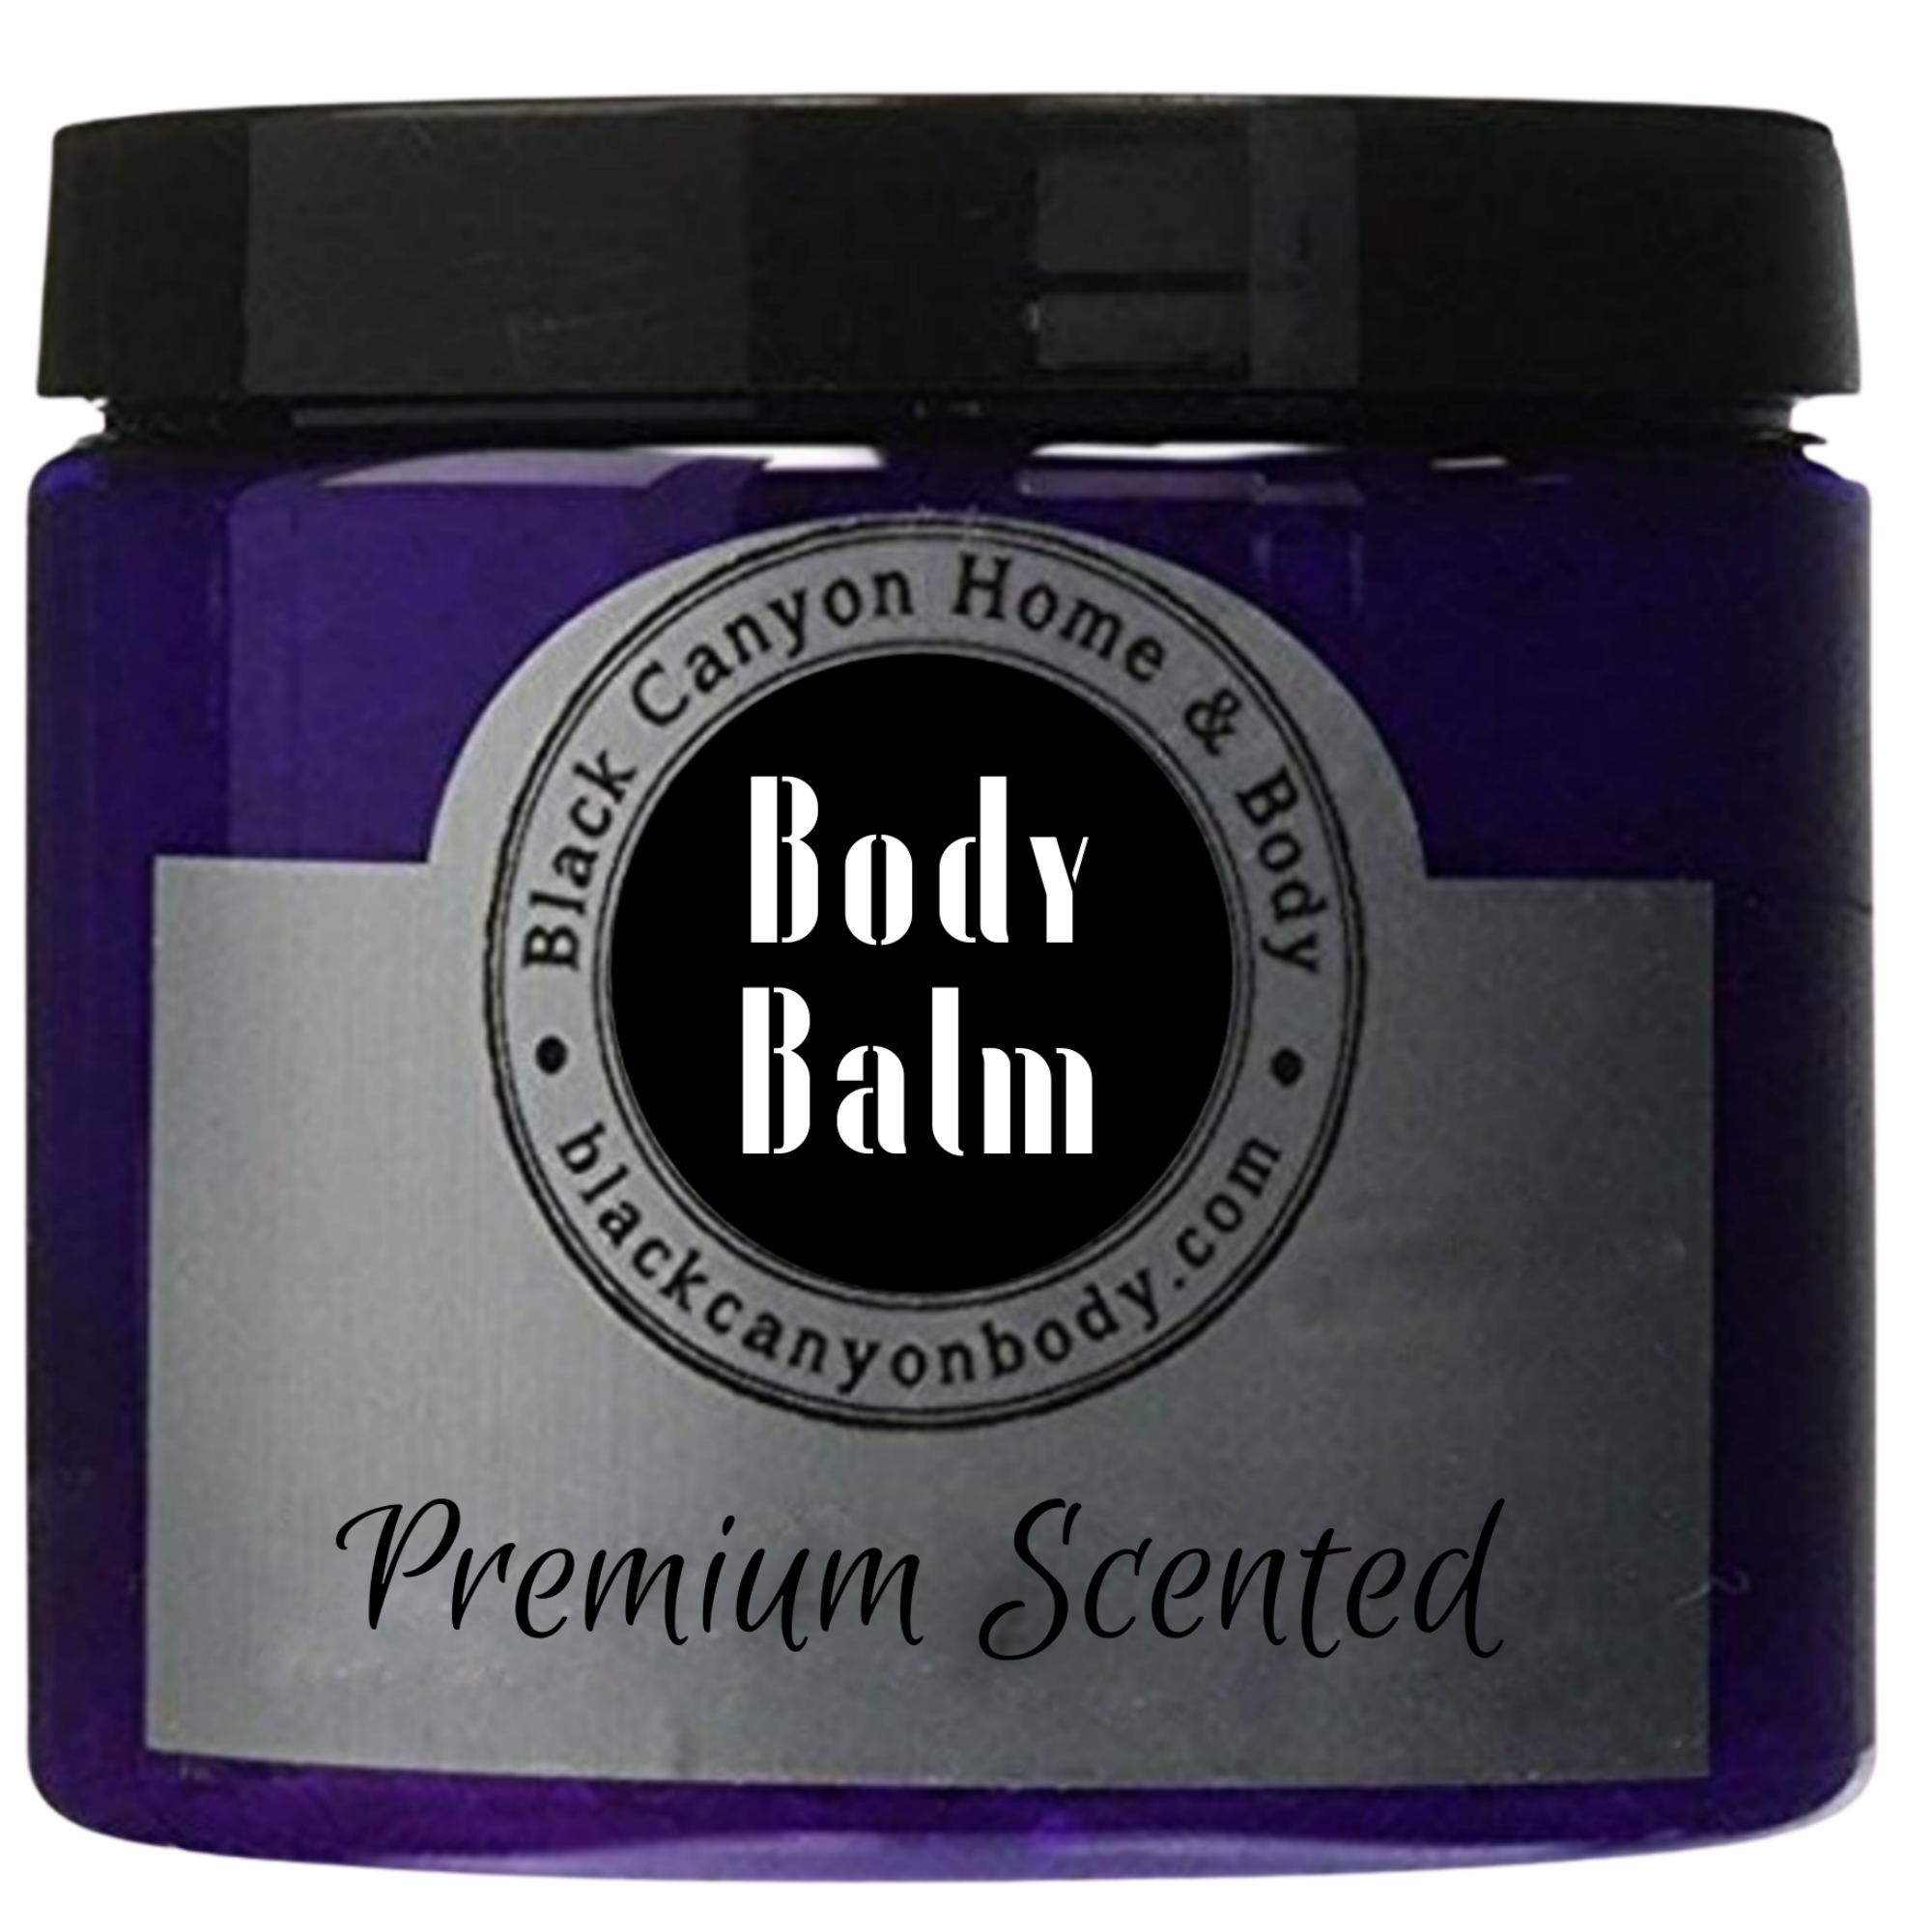 Black Canyon Apples & Oranges Scented Natural Body Balm with Shea